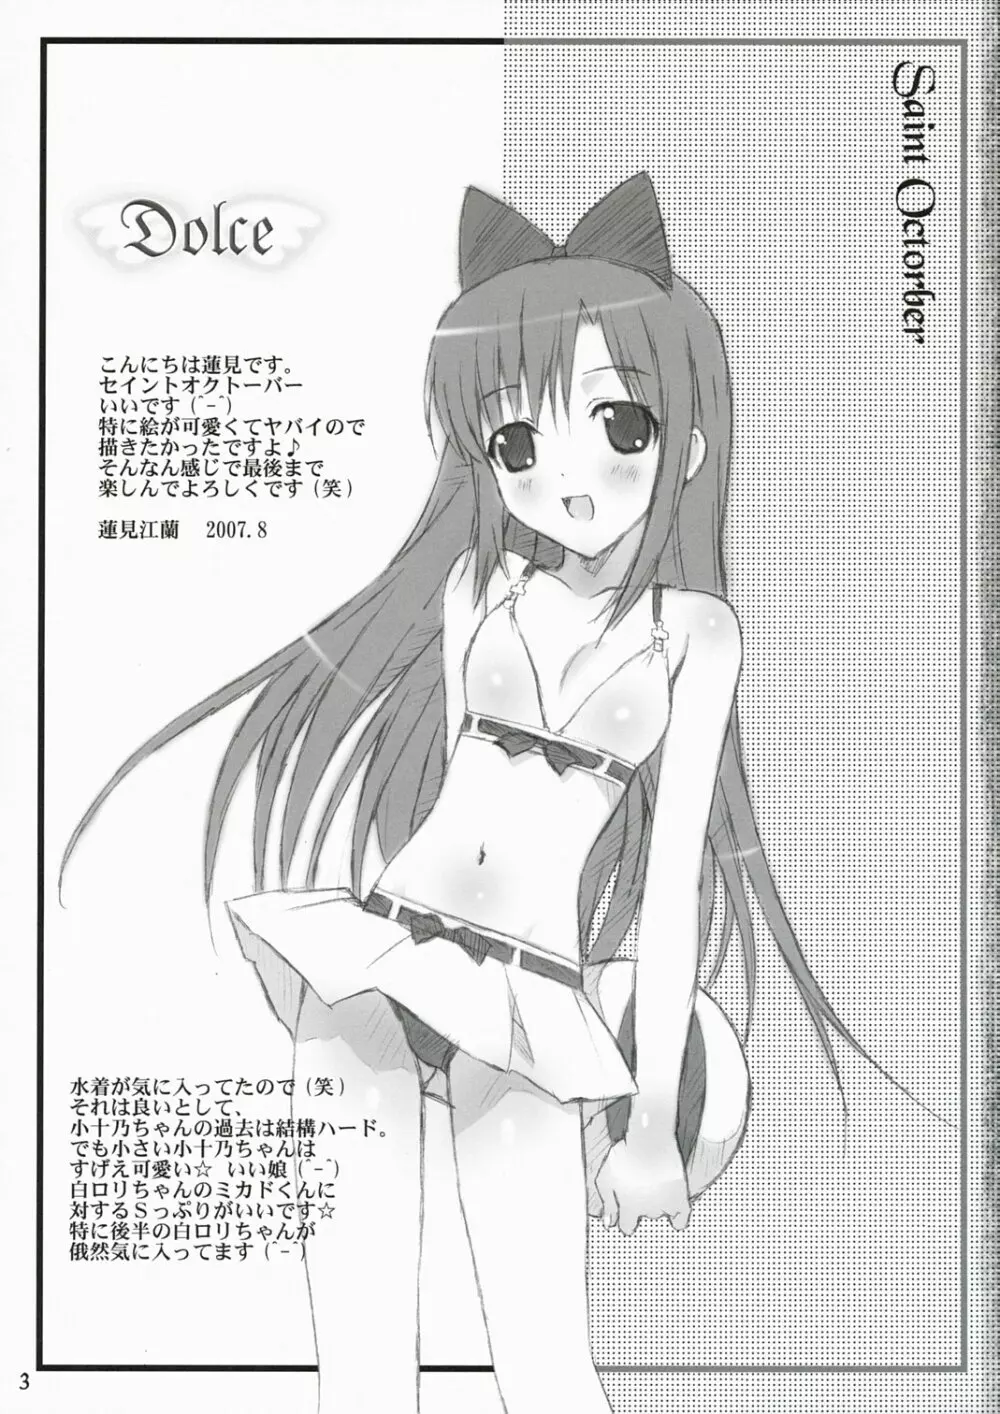 Dolce 2ページ